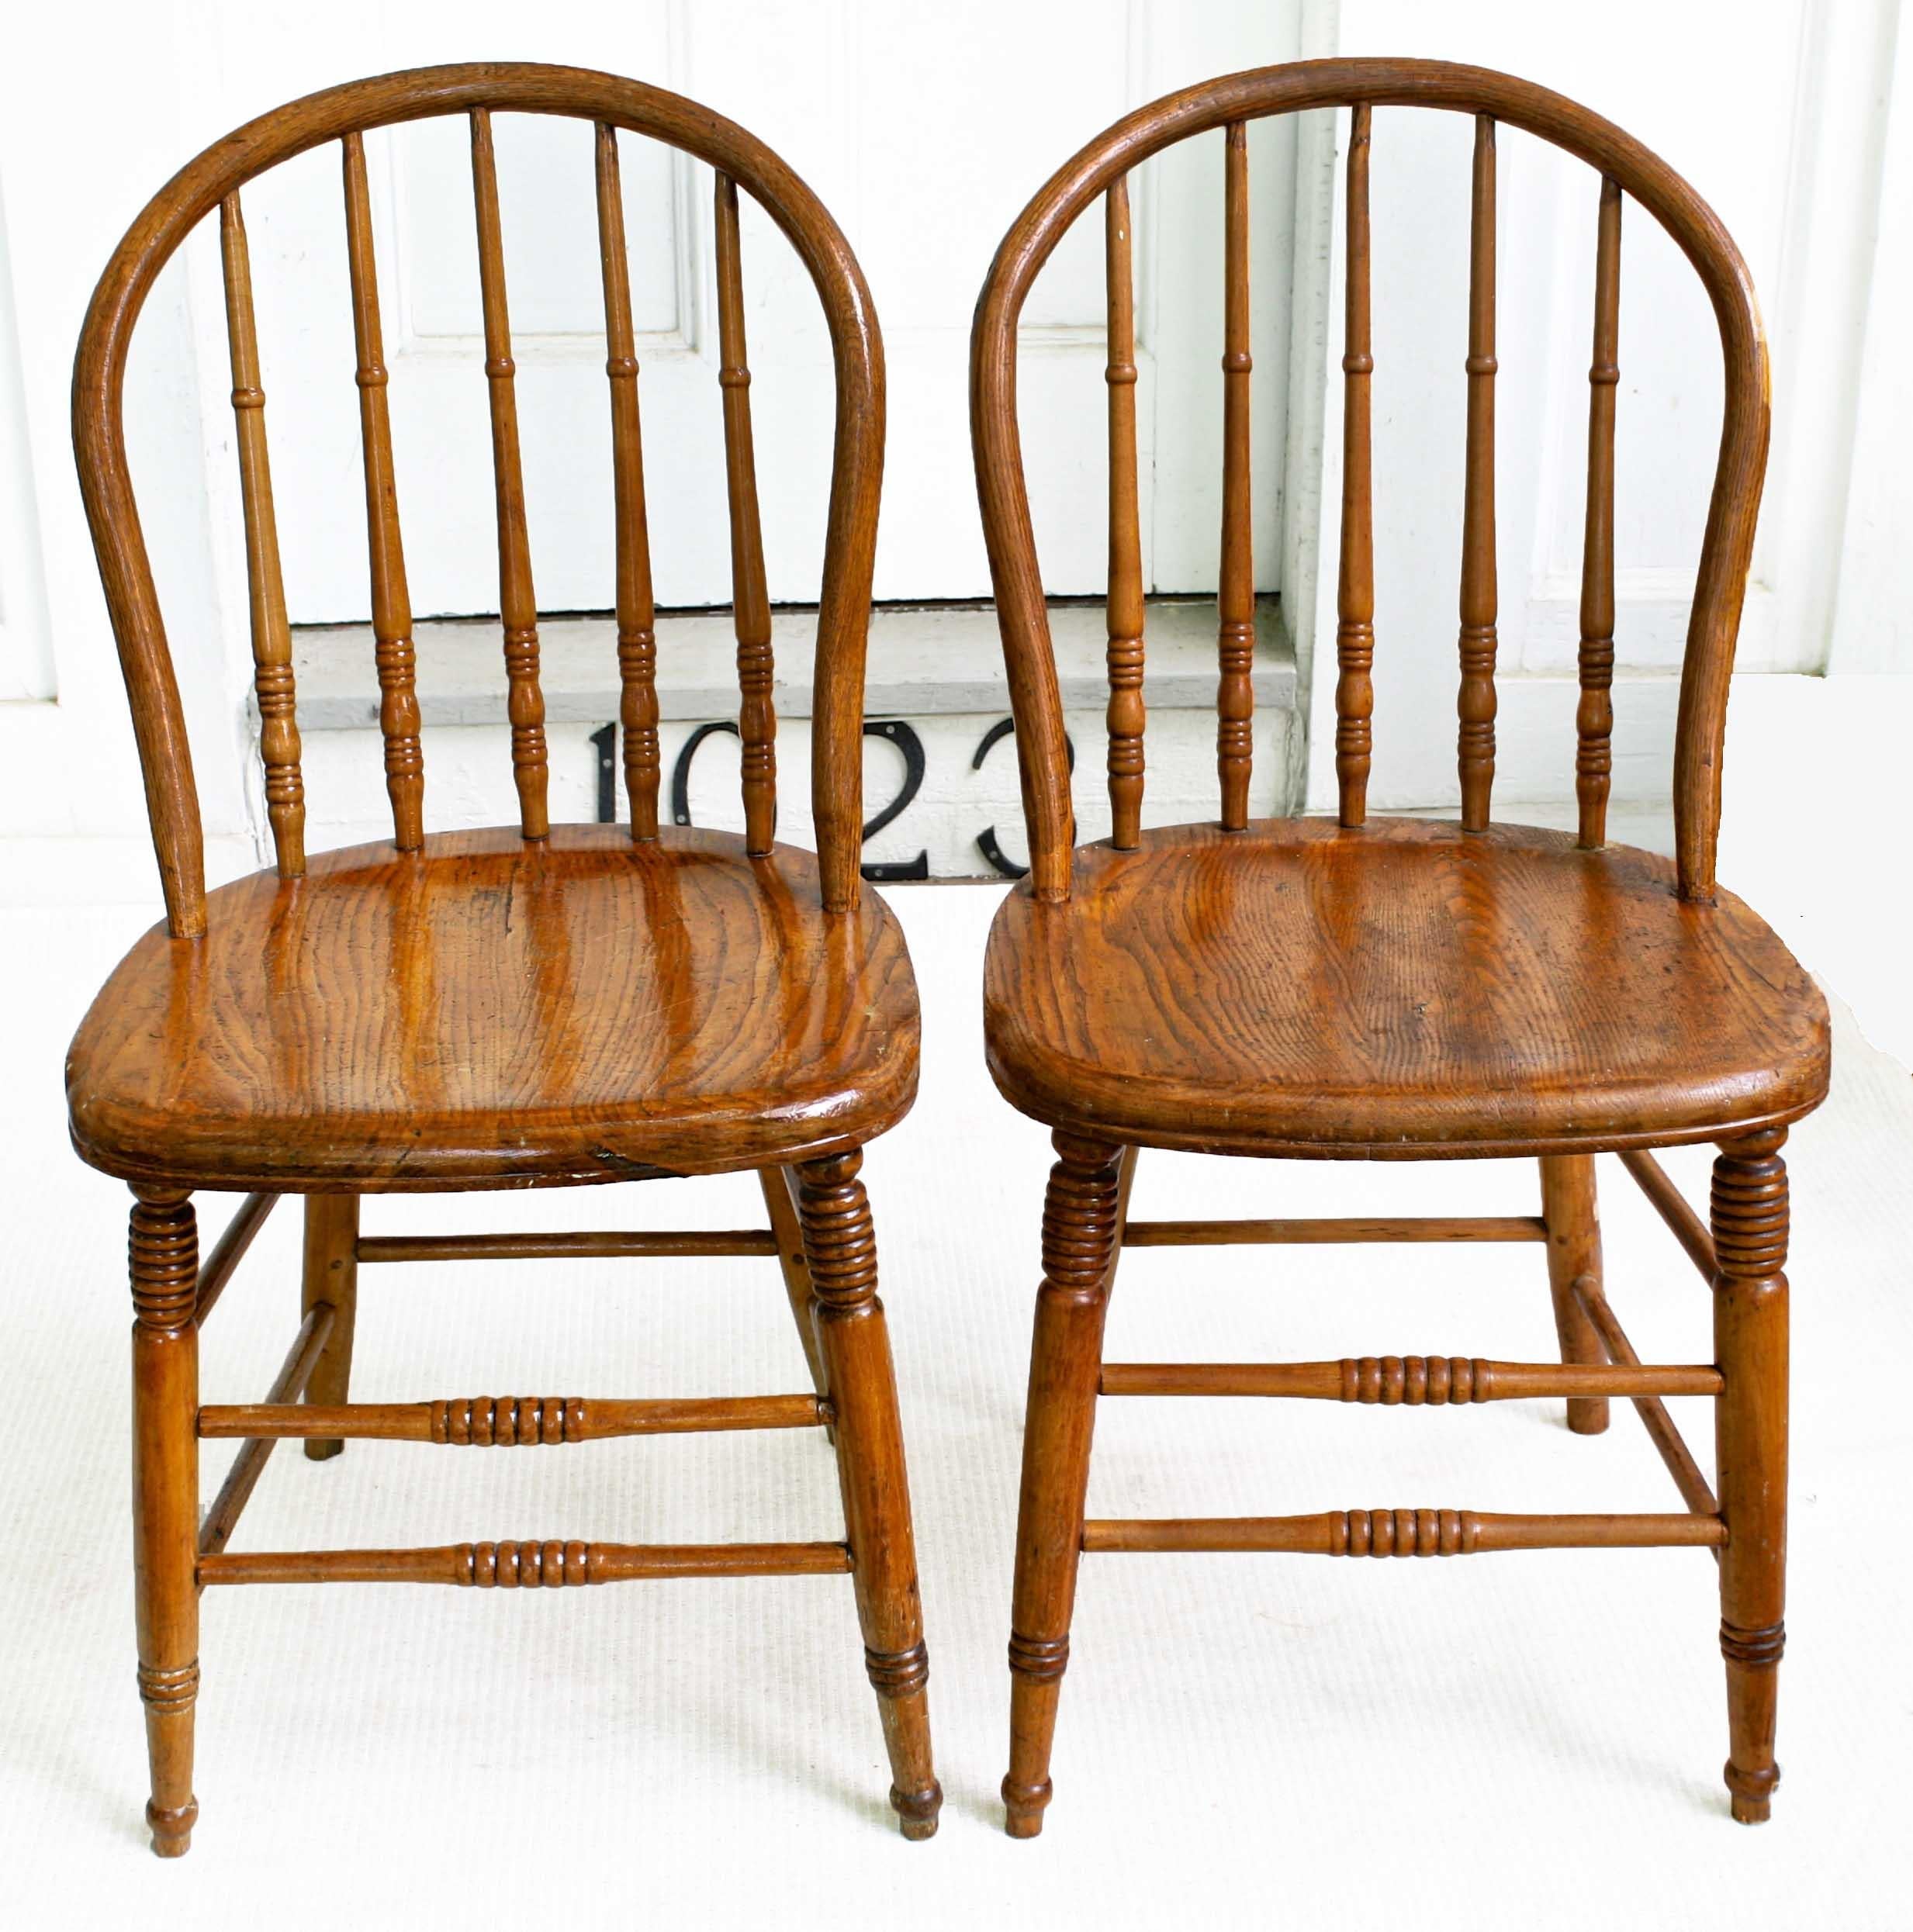 Hand-Crafted TEN Connecticut Hoop Back Windsor Chairs For Sale